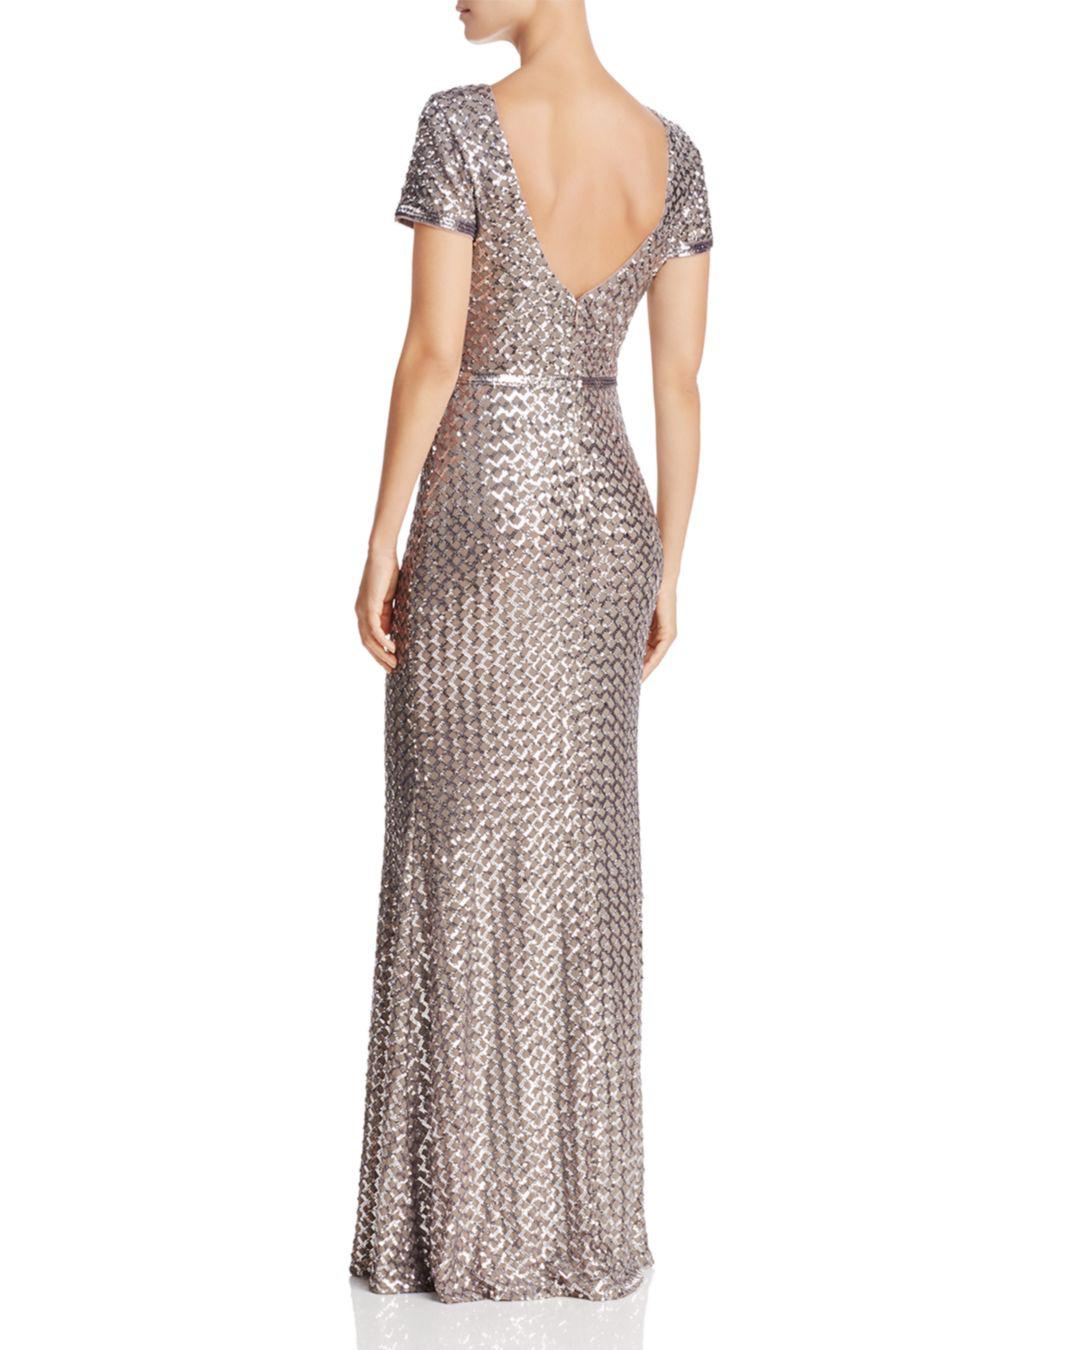 Aqua Belted Sequin Gown in Silver/Taupe ...